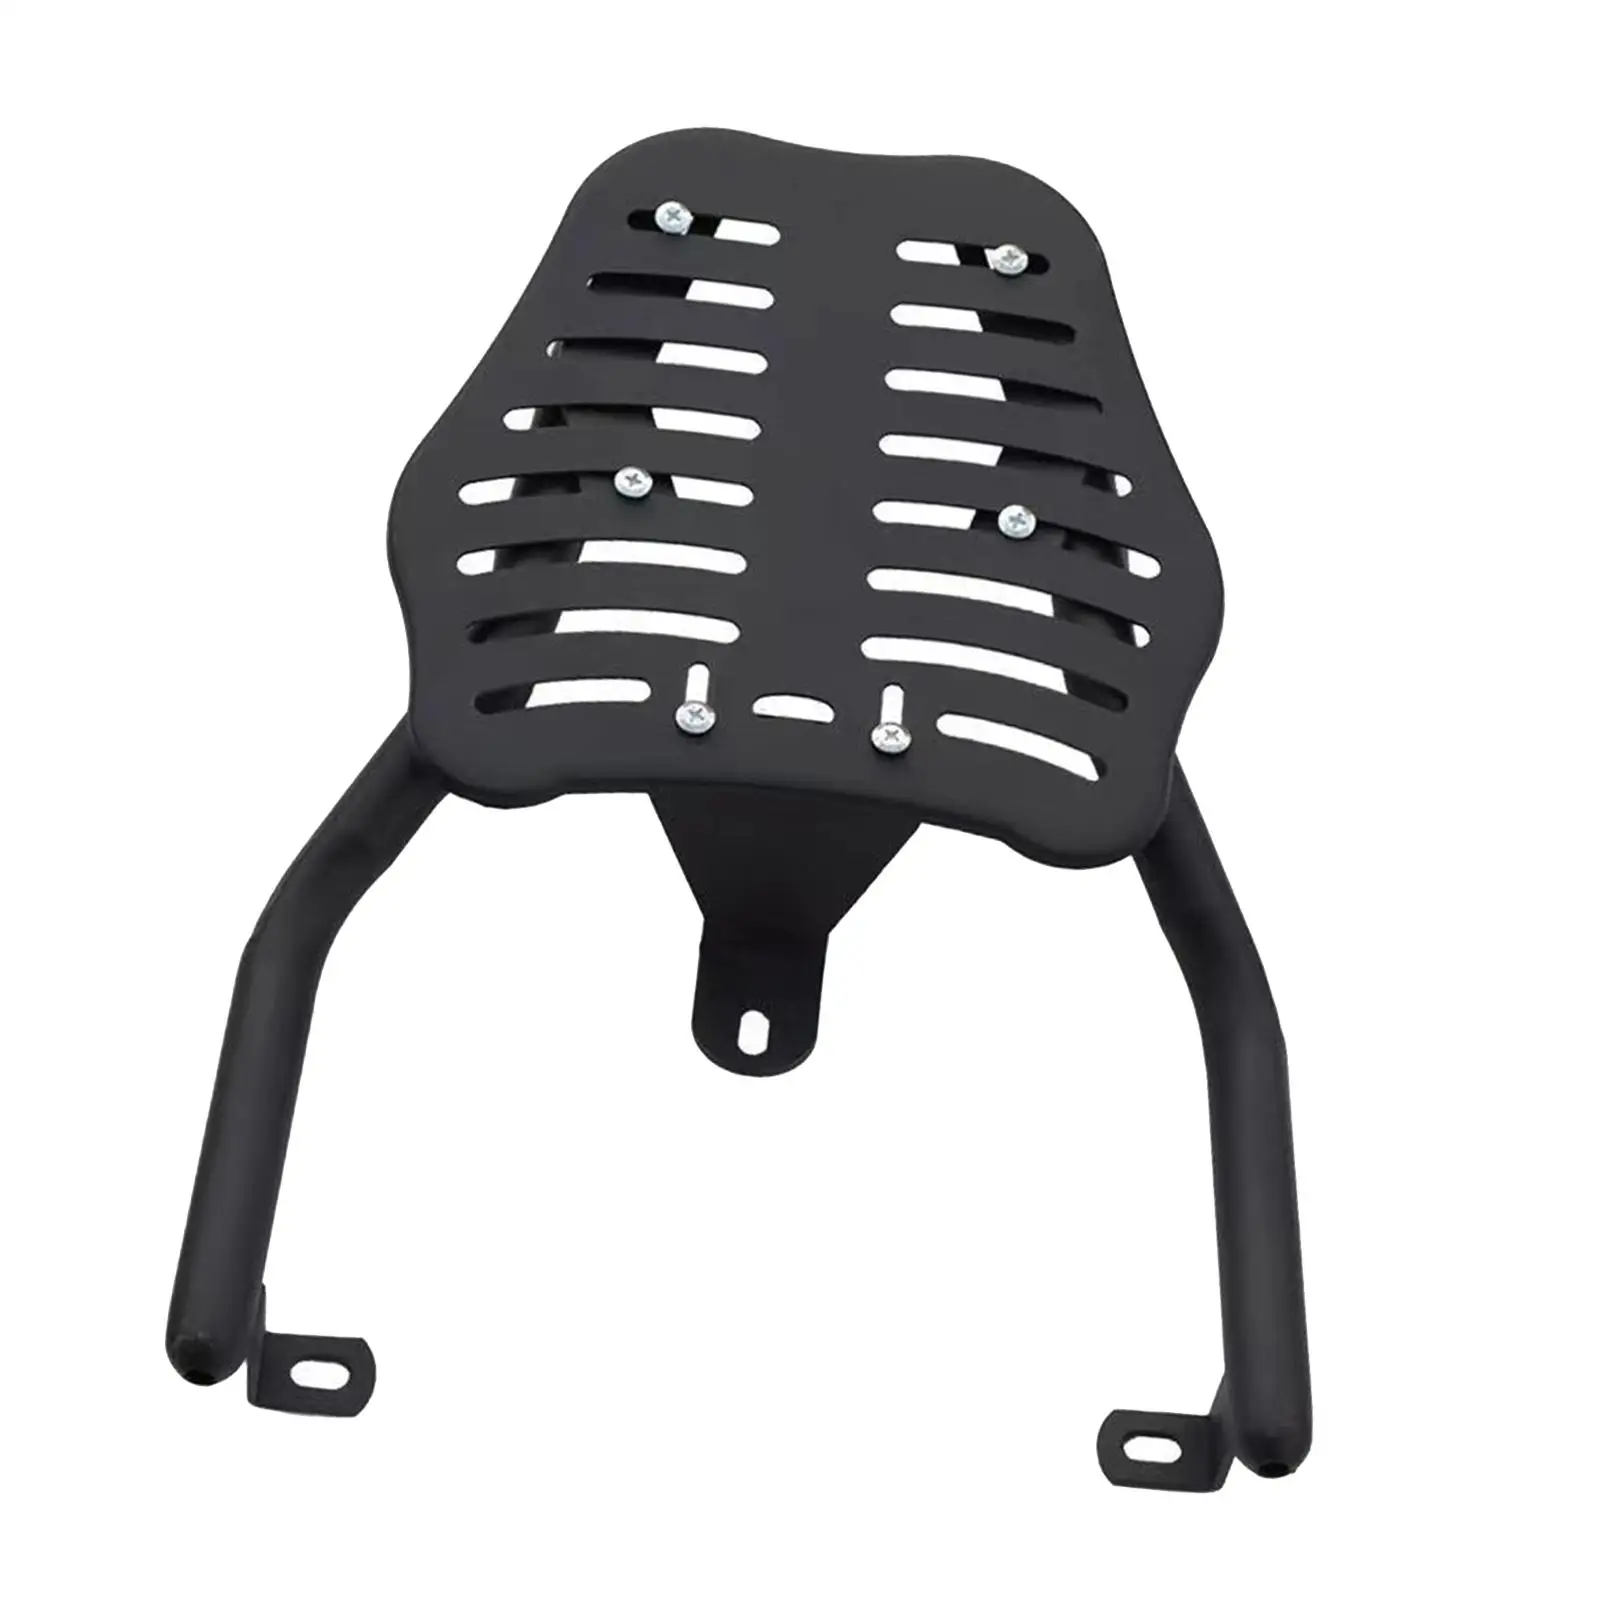 Rear Luggage Rack Carrier Durable Holder Replace Motorcycle Rear Fender Rack